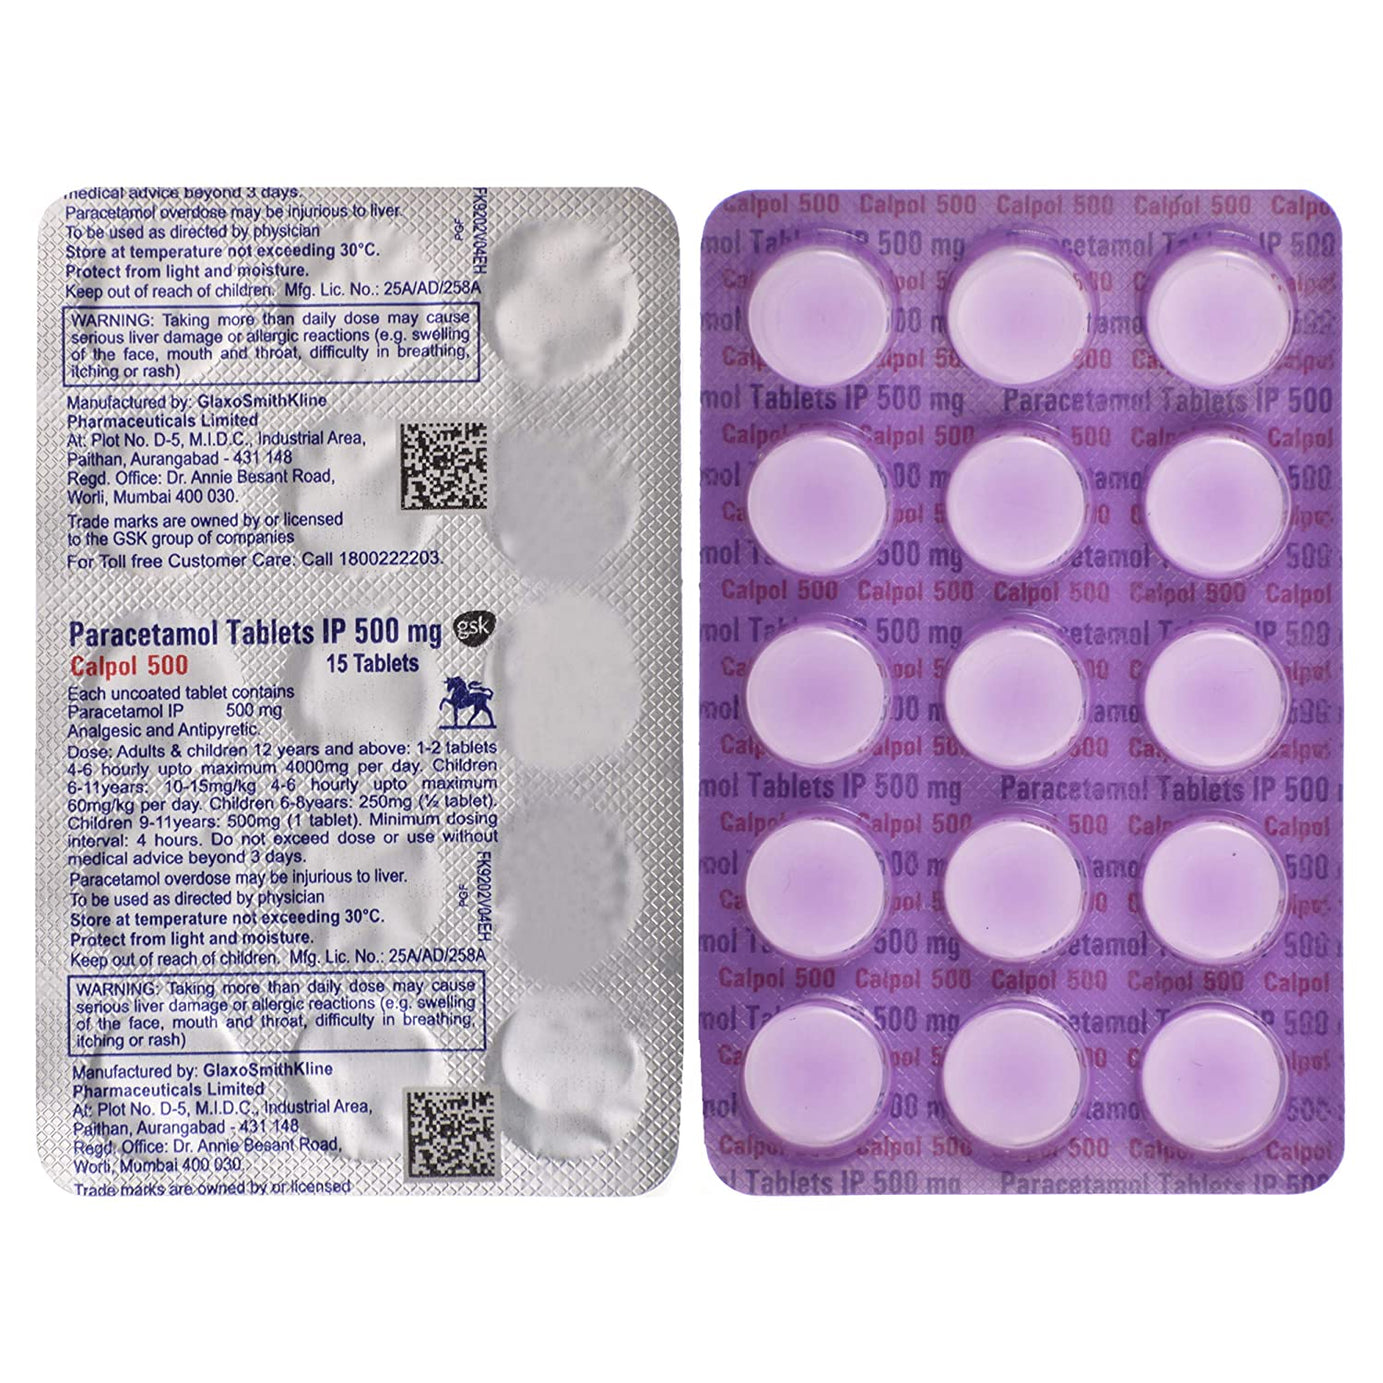 Shop Calpol 500  - Paracetamol Tablets IP 500mg - 15Tablets at price 15.04 from GSK Online - Ayush Care